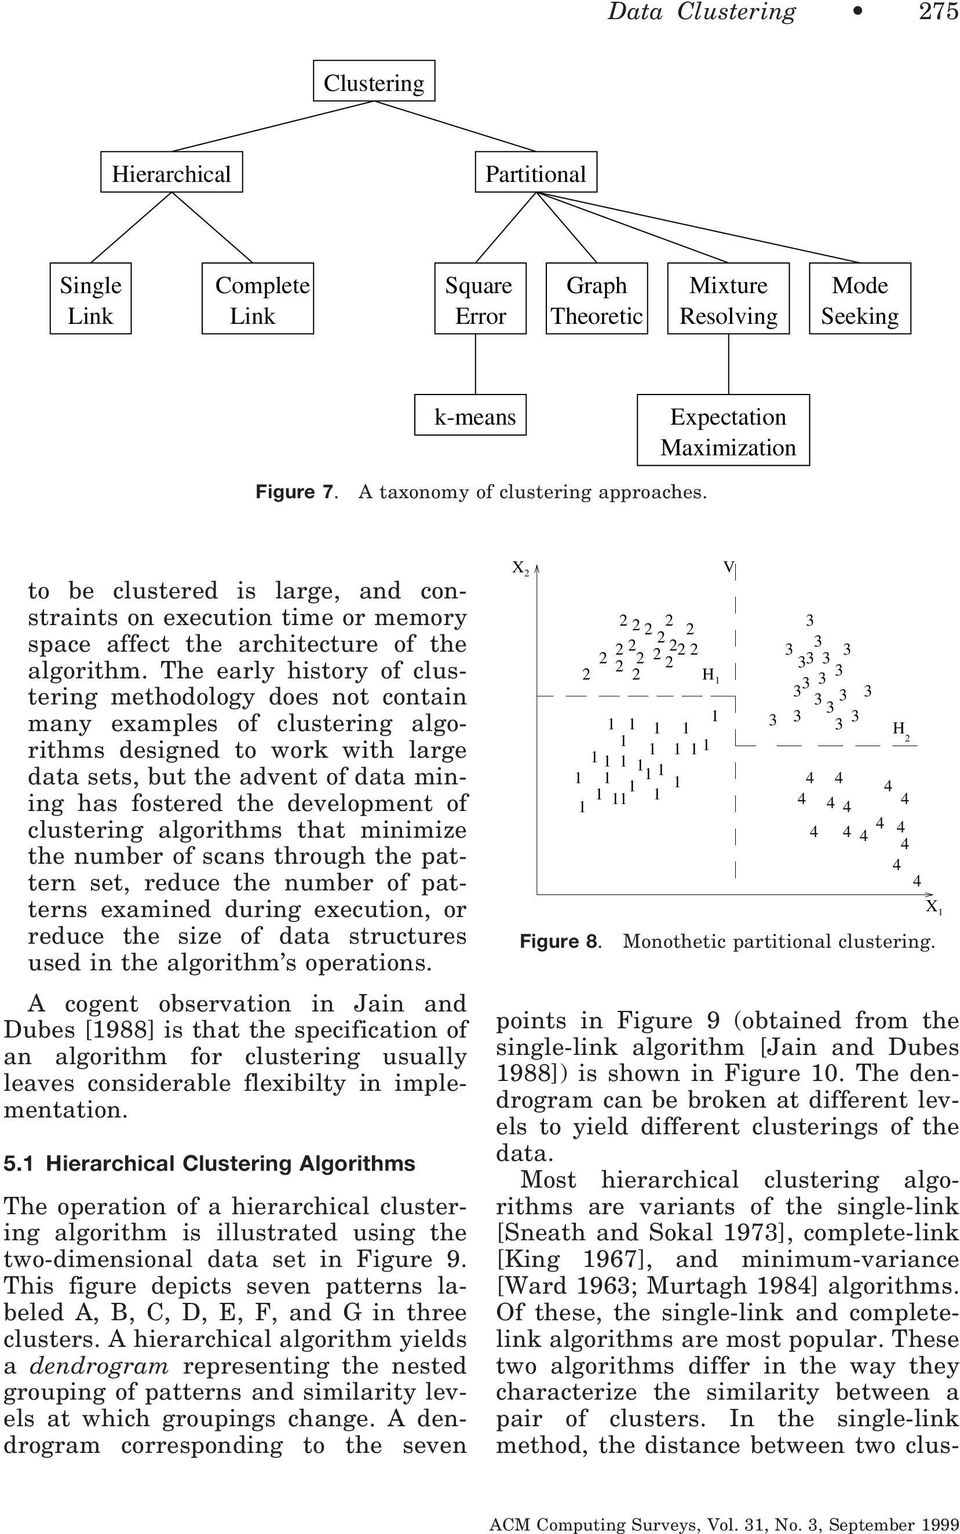 many eamples of clustering algorithms designed to work with large data sets, but the advent of data mining has fostered the development of clustering algorithms that minimize the number of scans